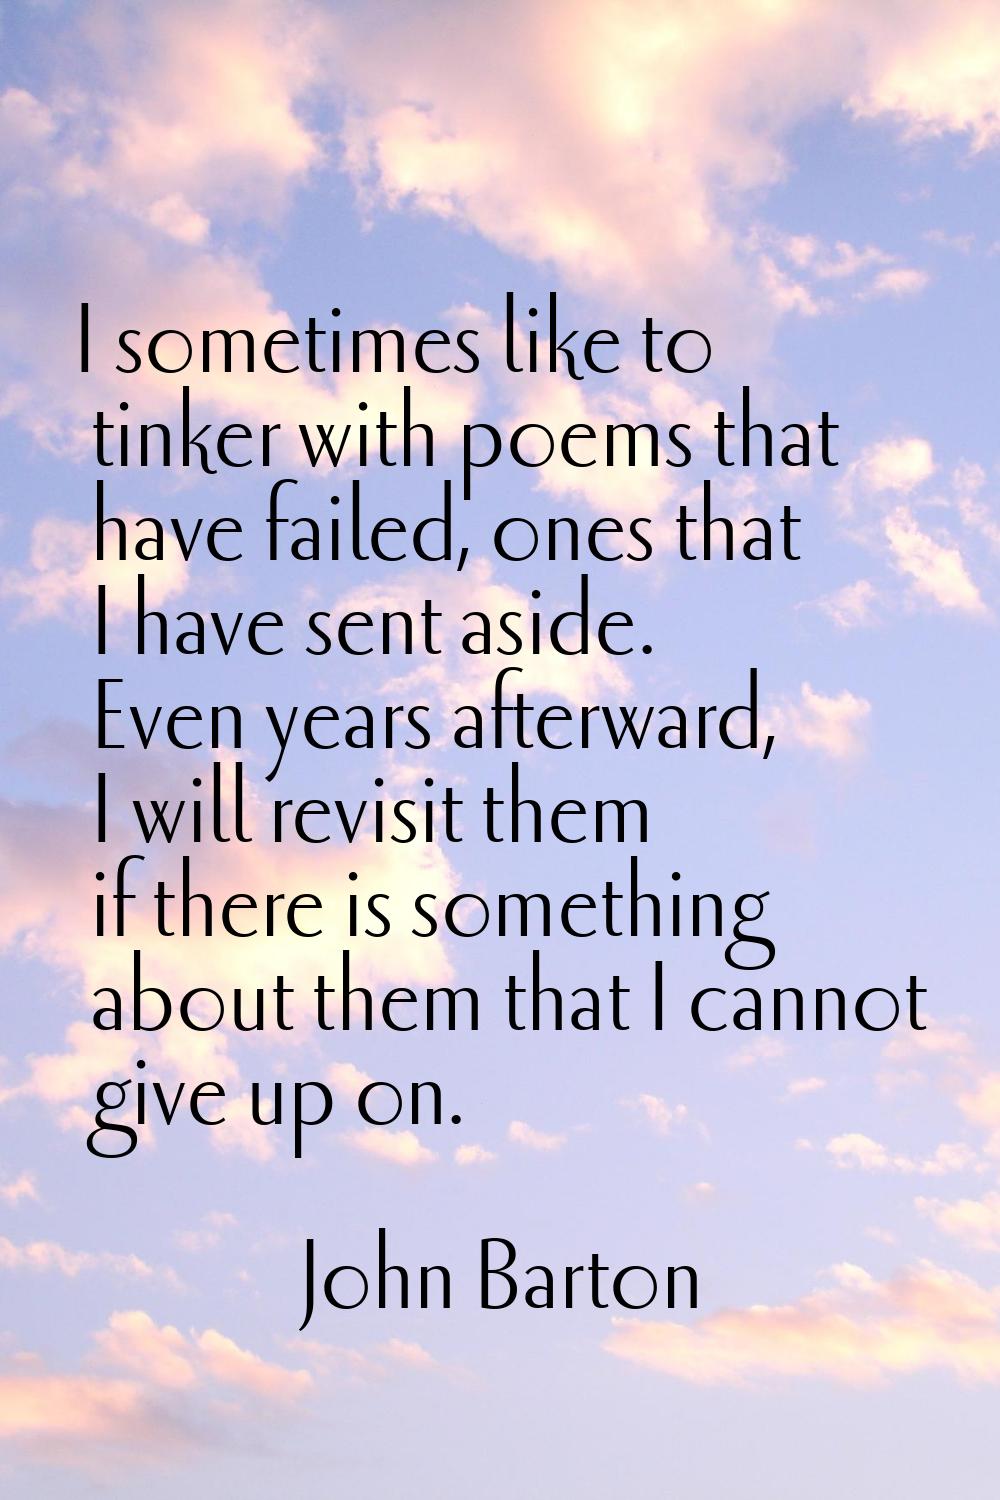 I sometimes like to tinker with poems that have failed, ones that I have sent aside. Even years aft